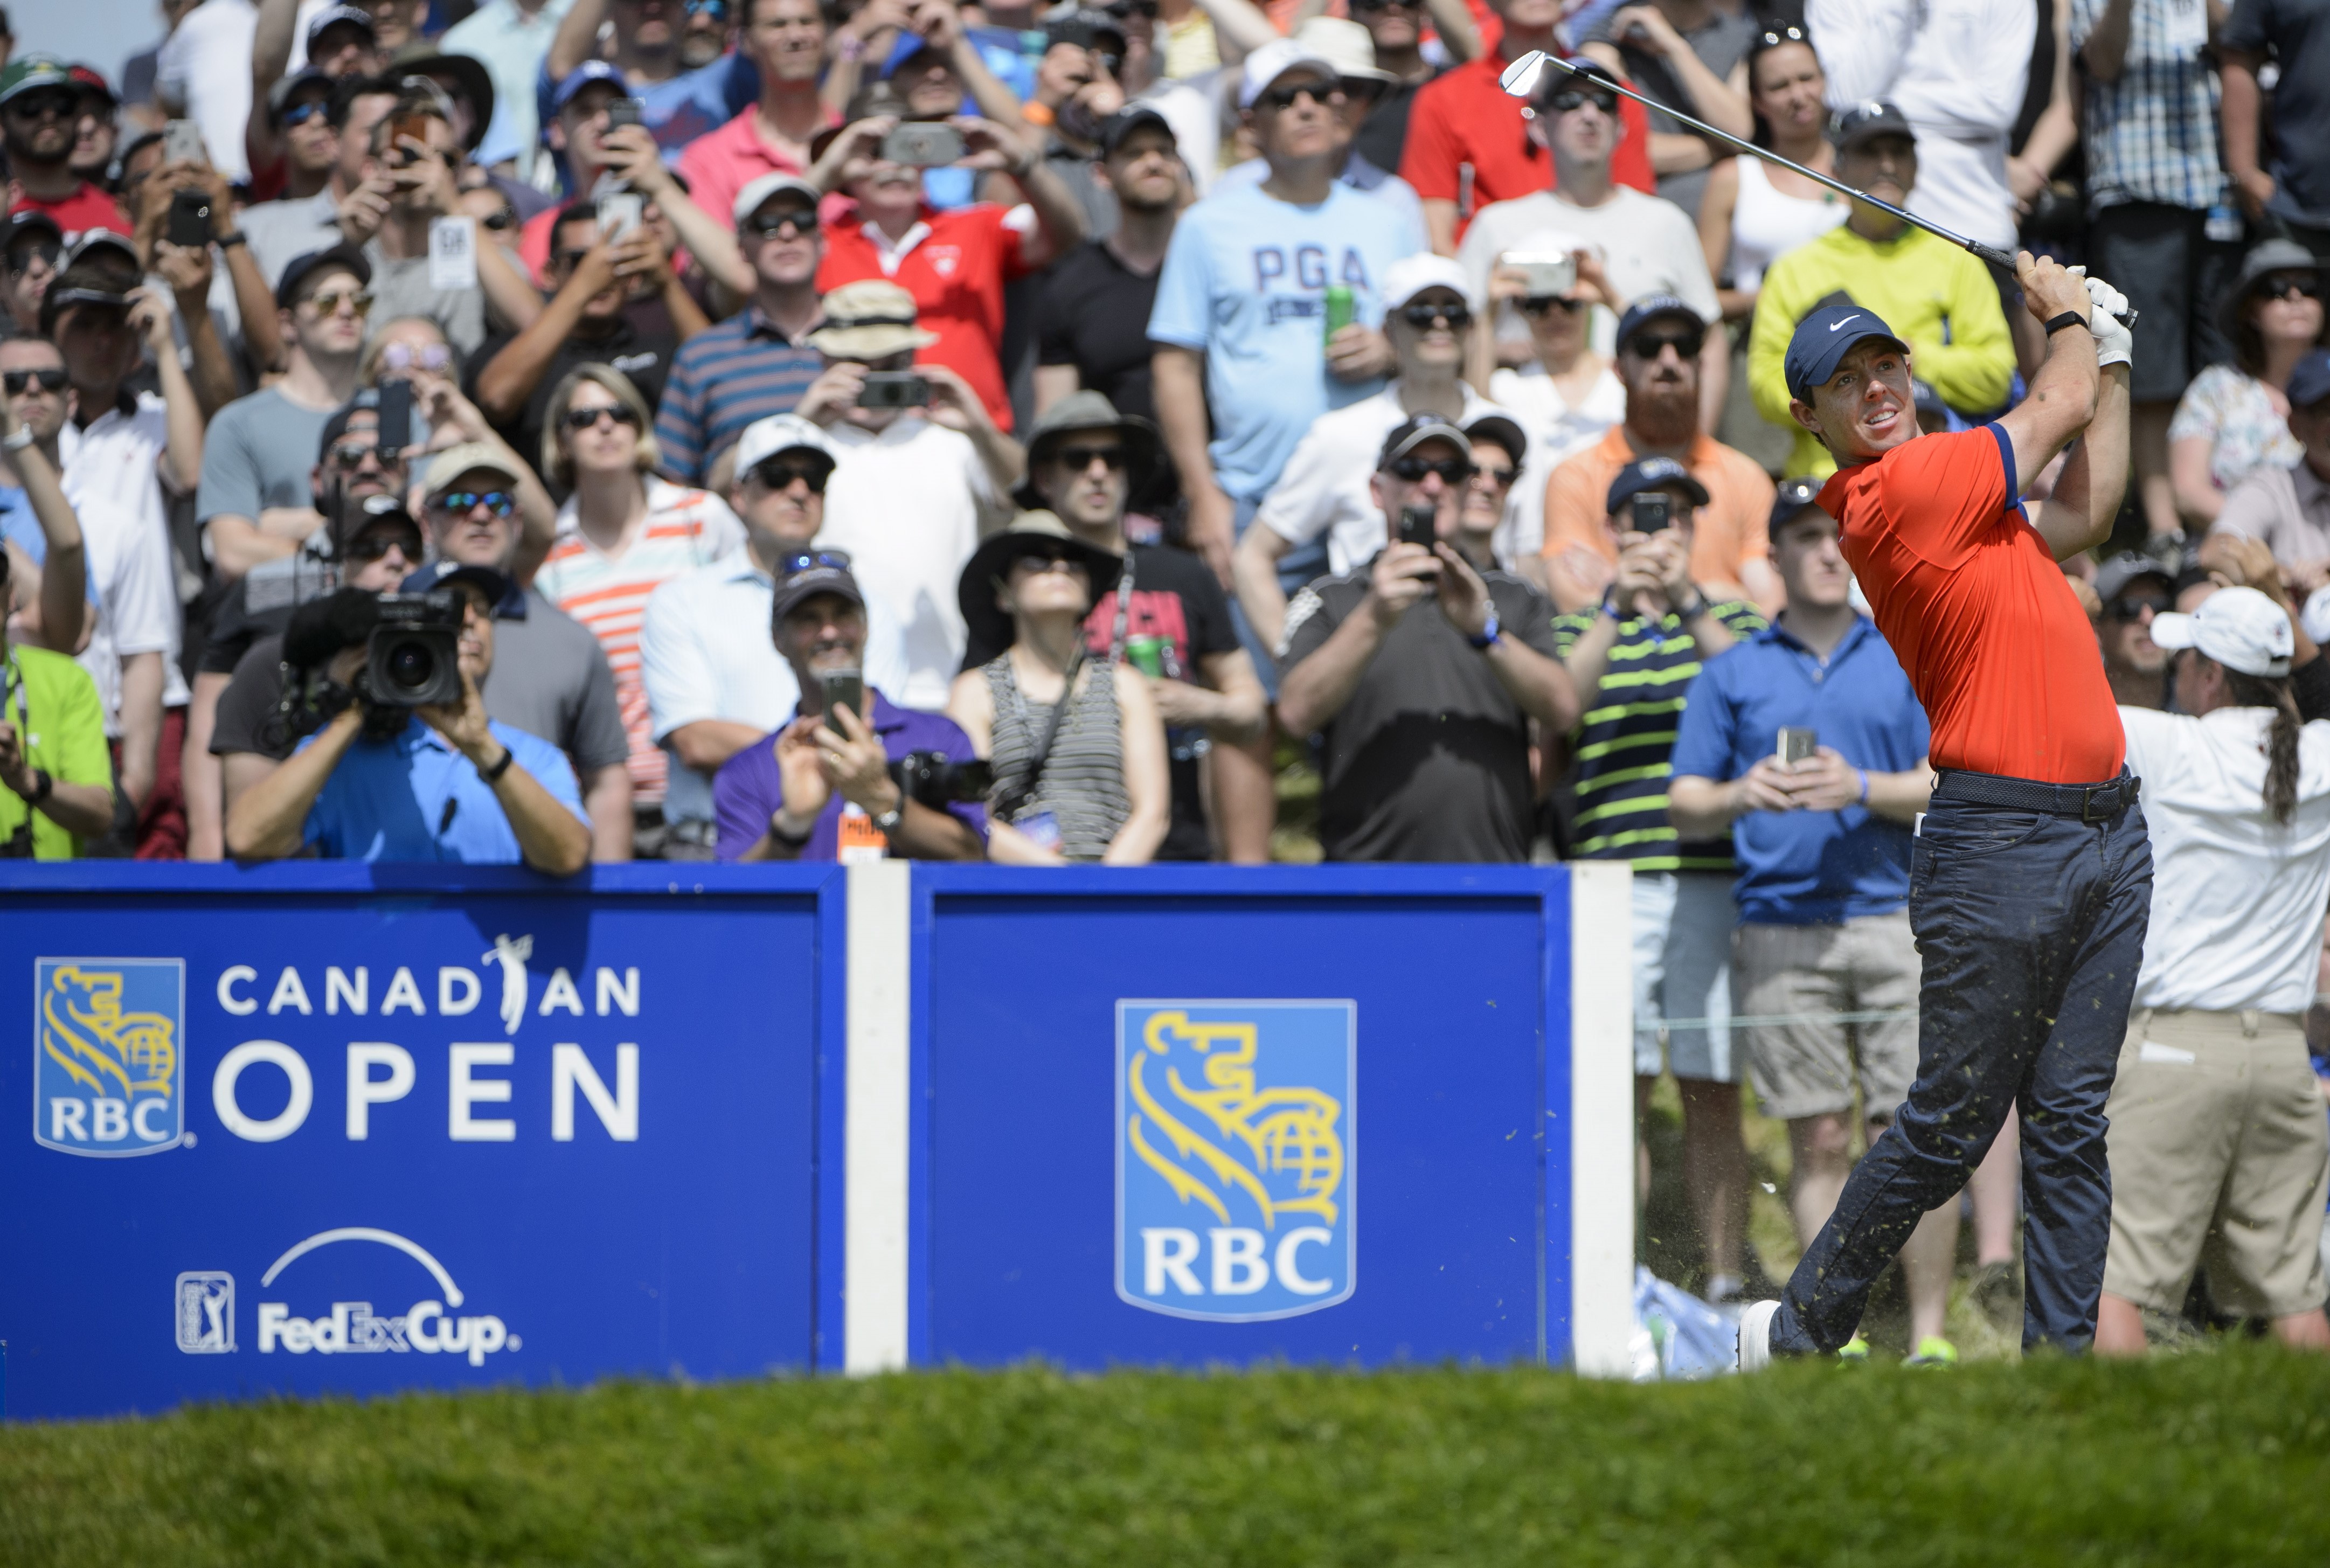 RBC Canadian Open in mid-June 2020 is cancelled due to coronavirus pandemic restrictions Globalnews.ca